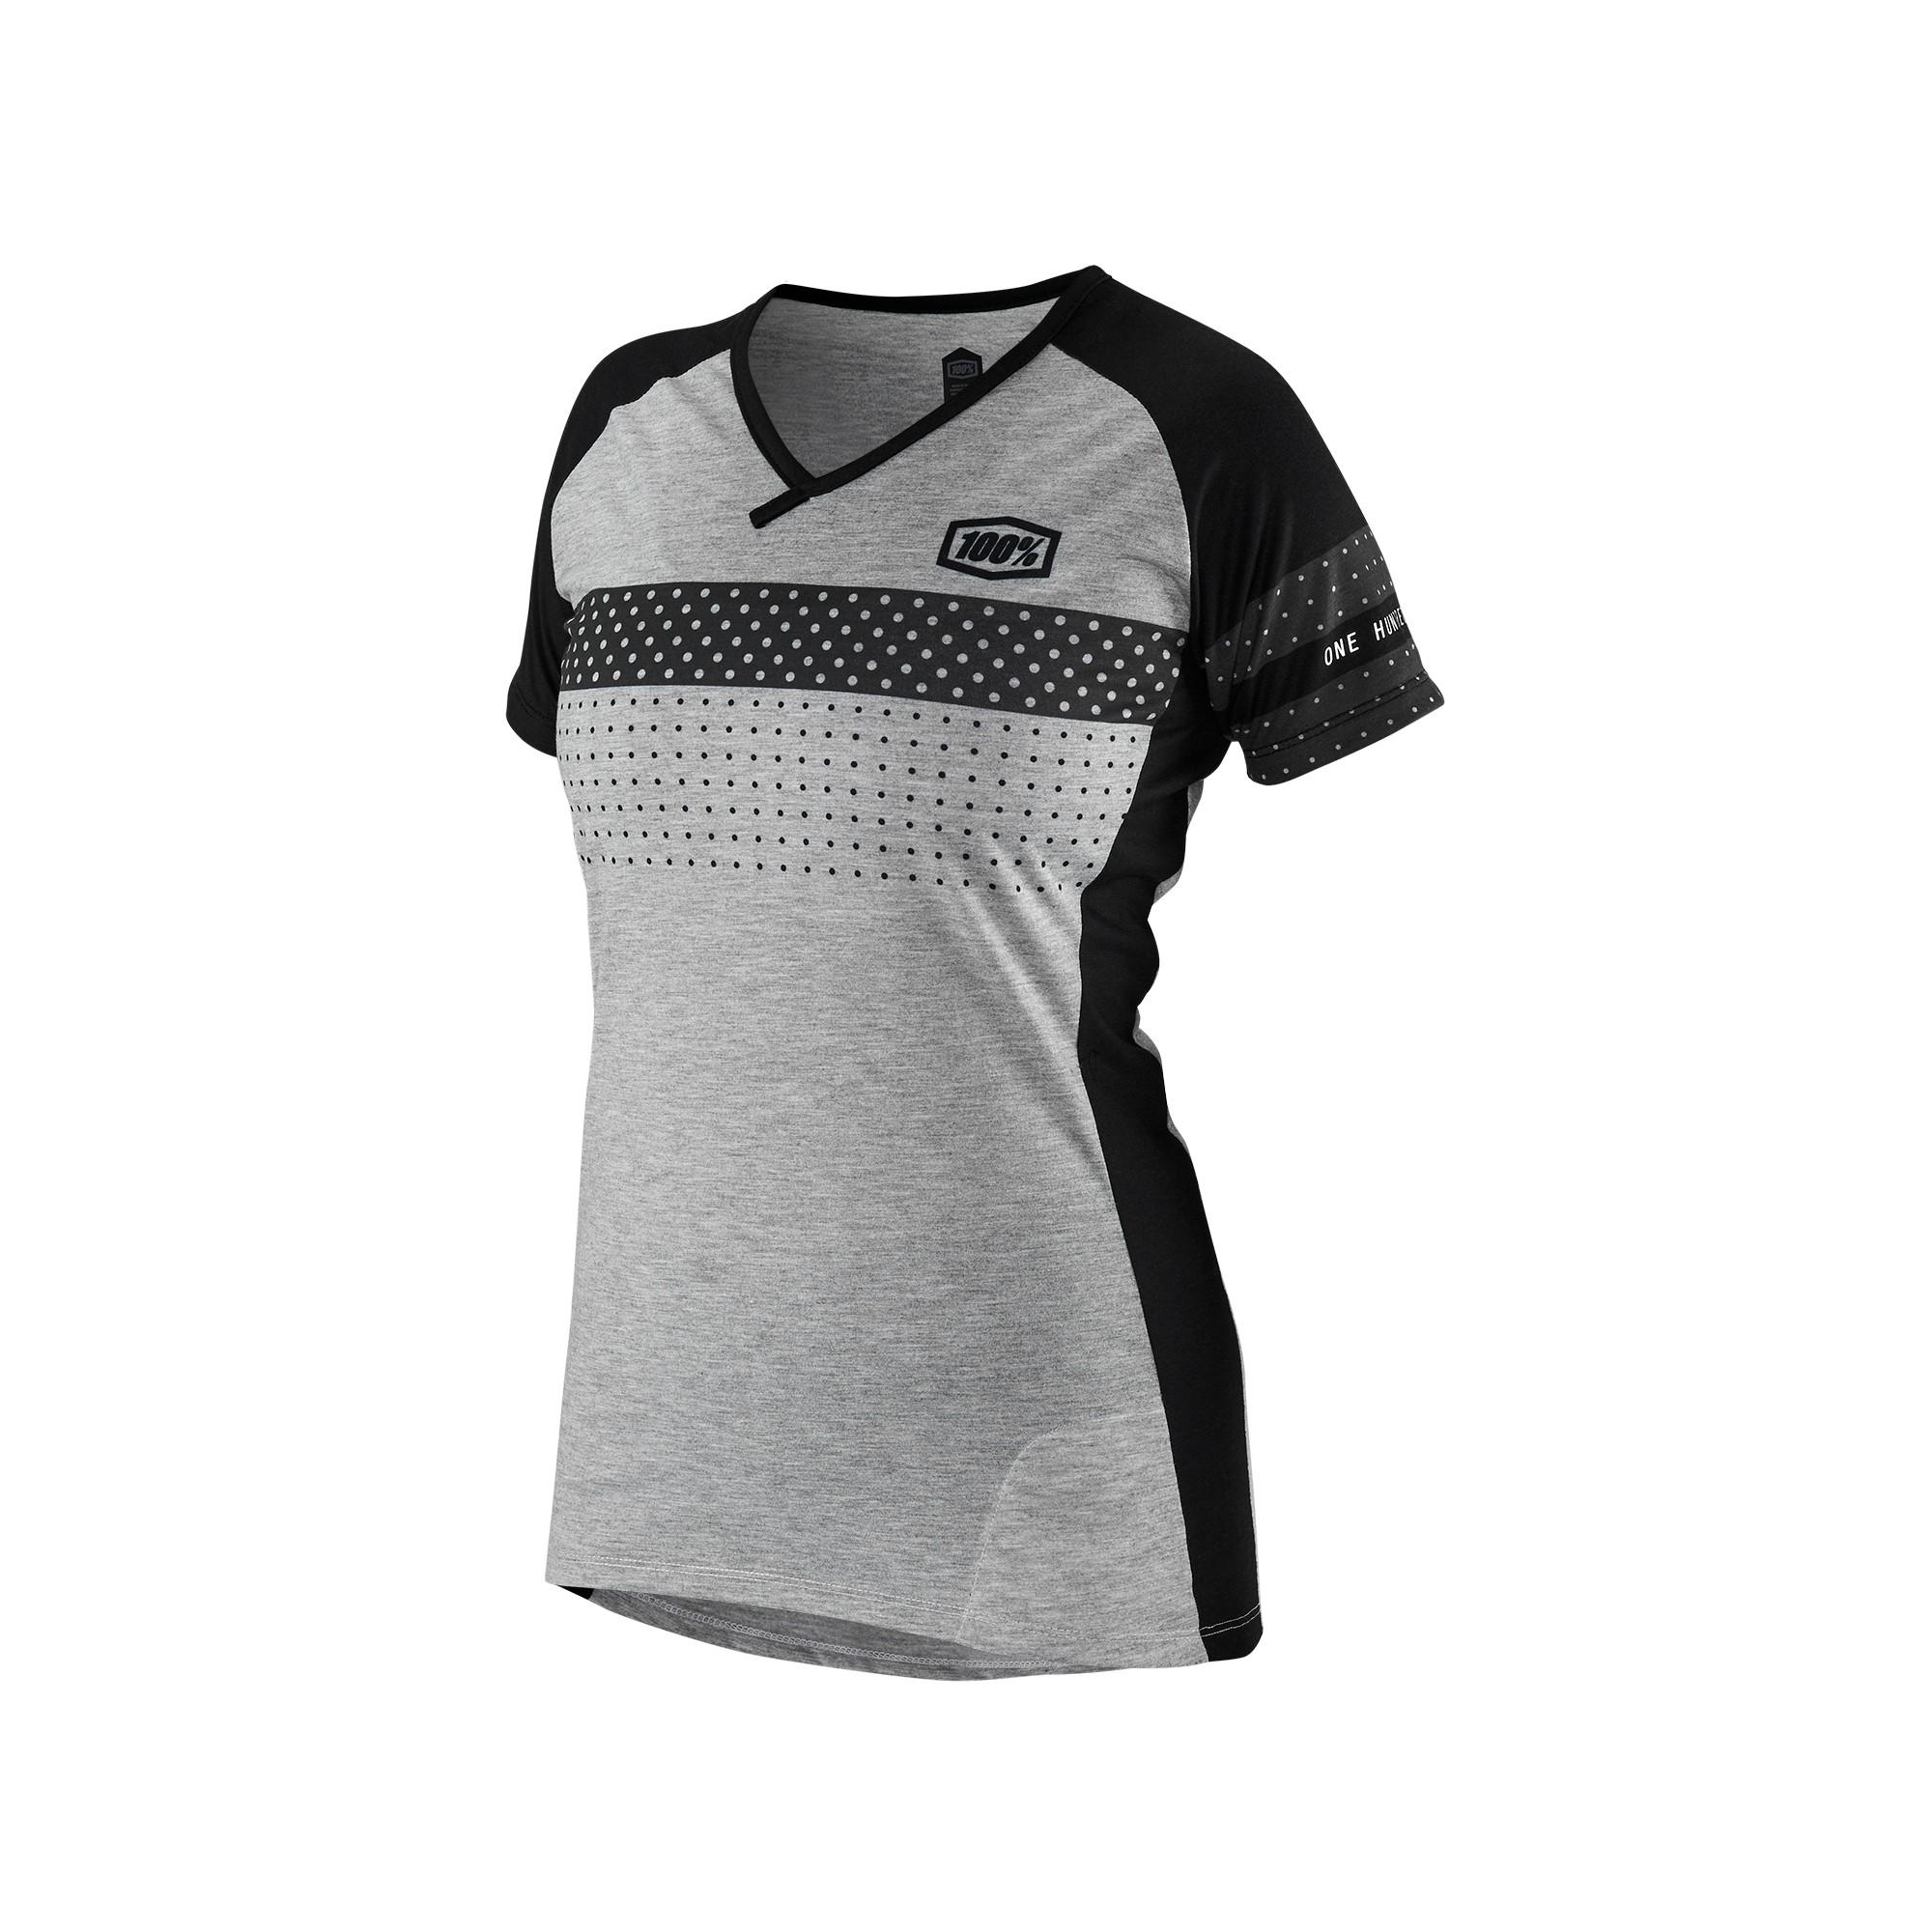 100% Womens Airmatic Jersey - Black